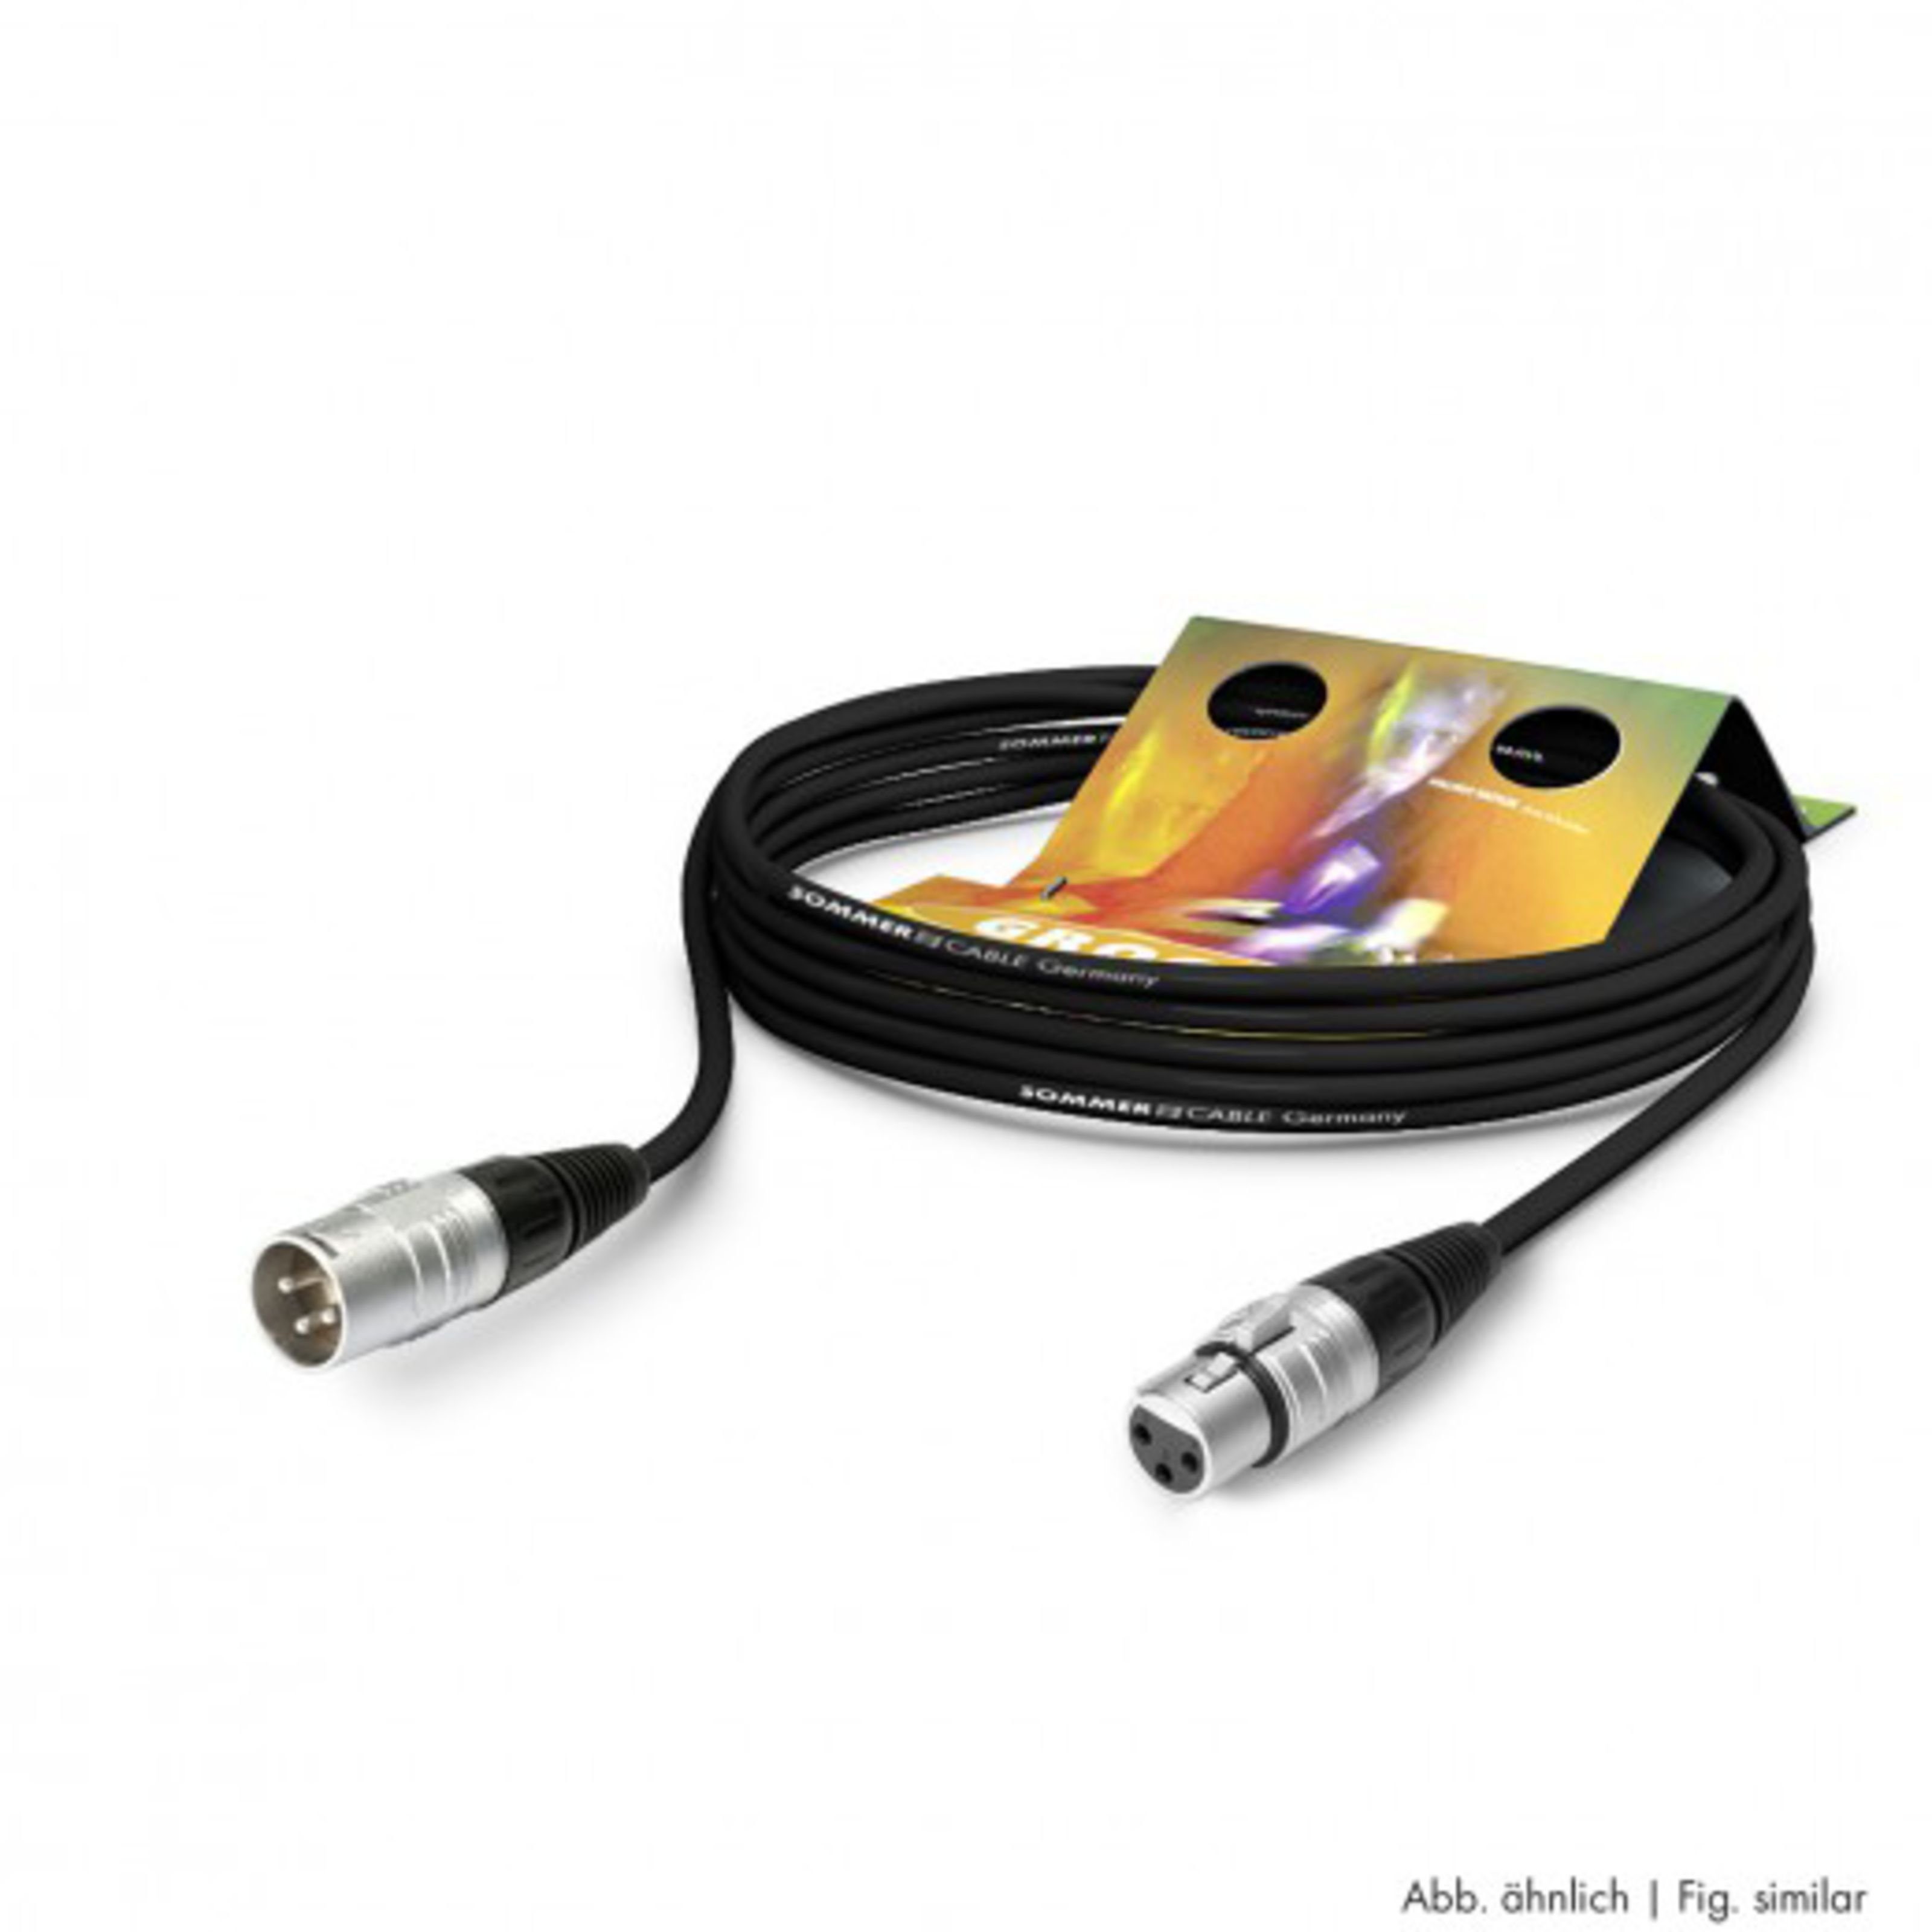 Sommer Cable Spielzeug-Musikinstrument, SGHN-0250-SW Mikrofonkabel 2,5 m - Mikrofonkabel | Musikspielzeug